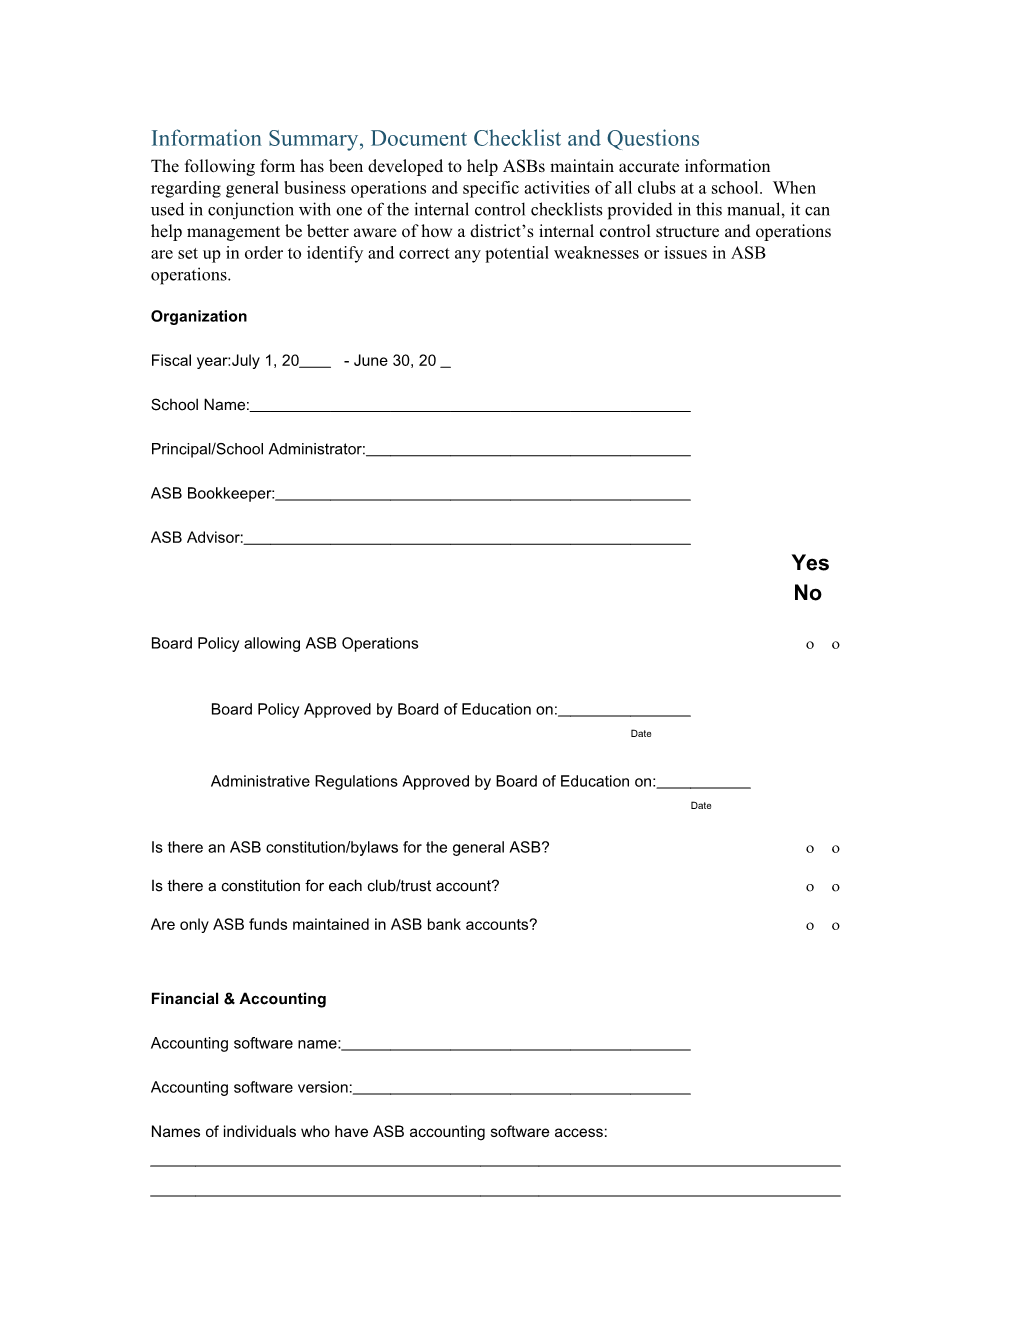 Information Summary, Document Checklist and Questions